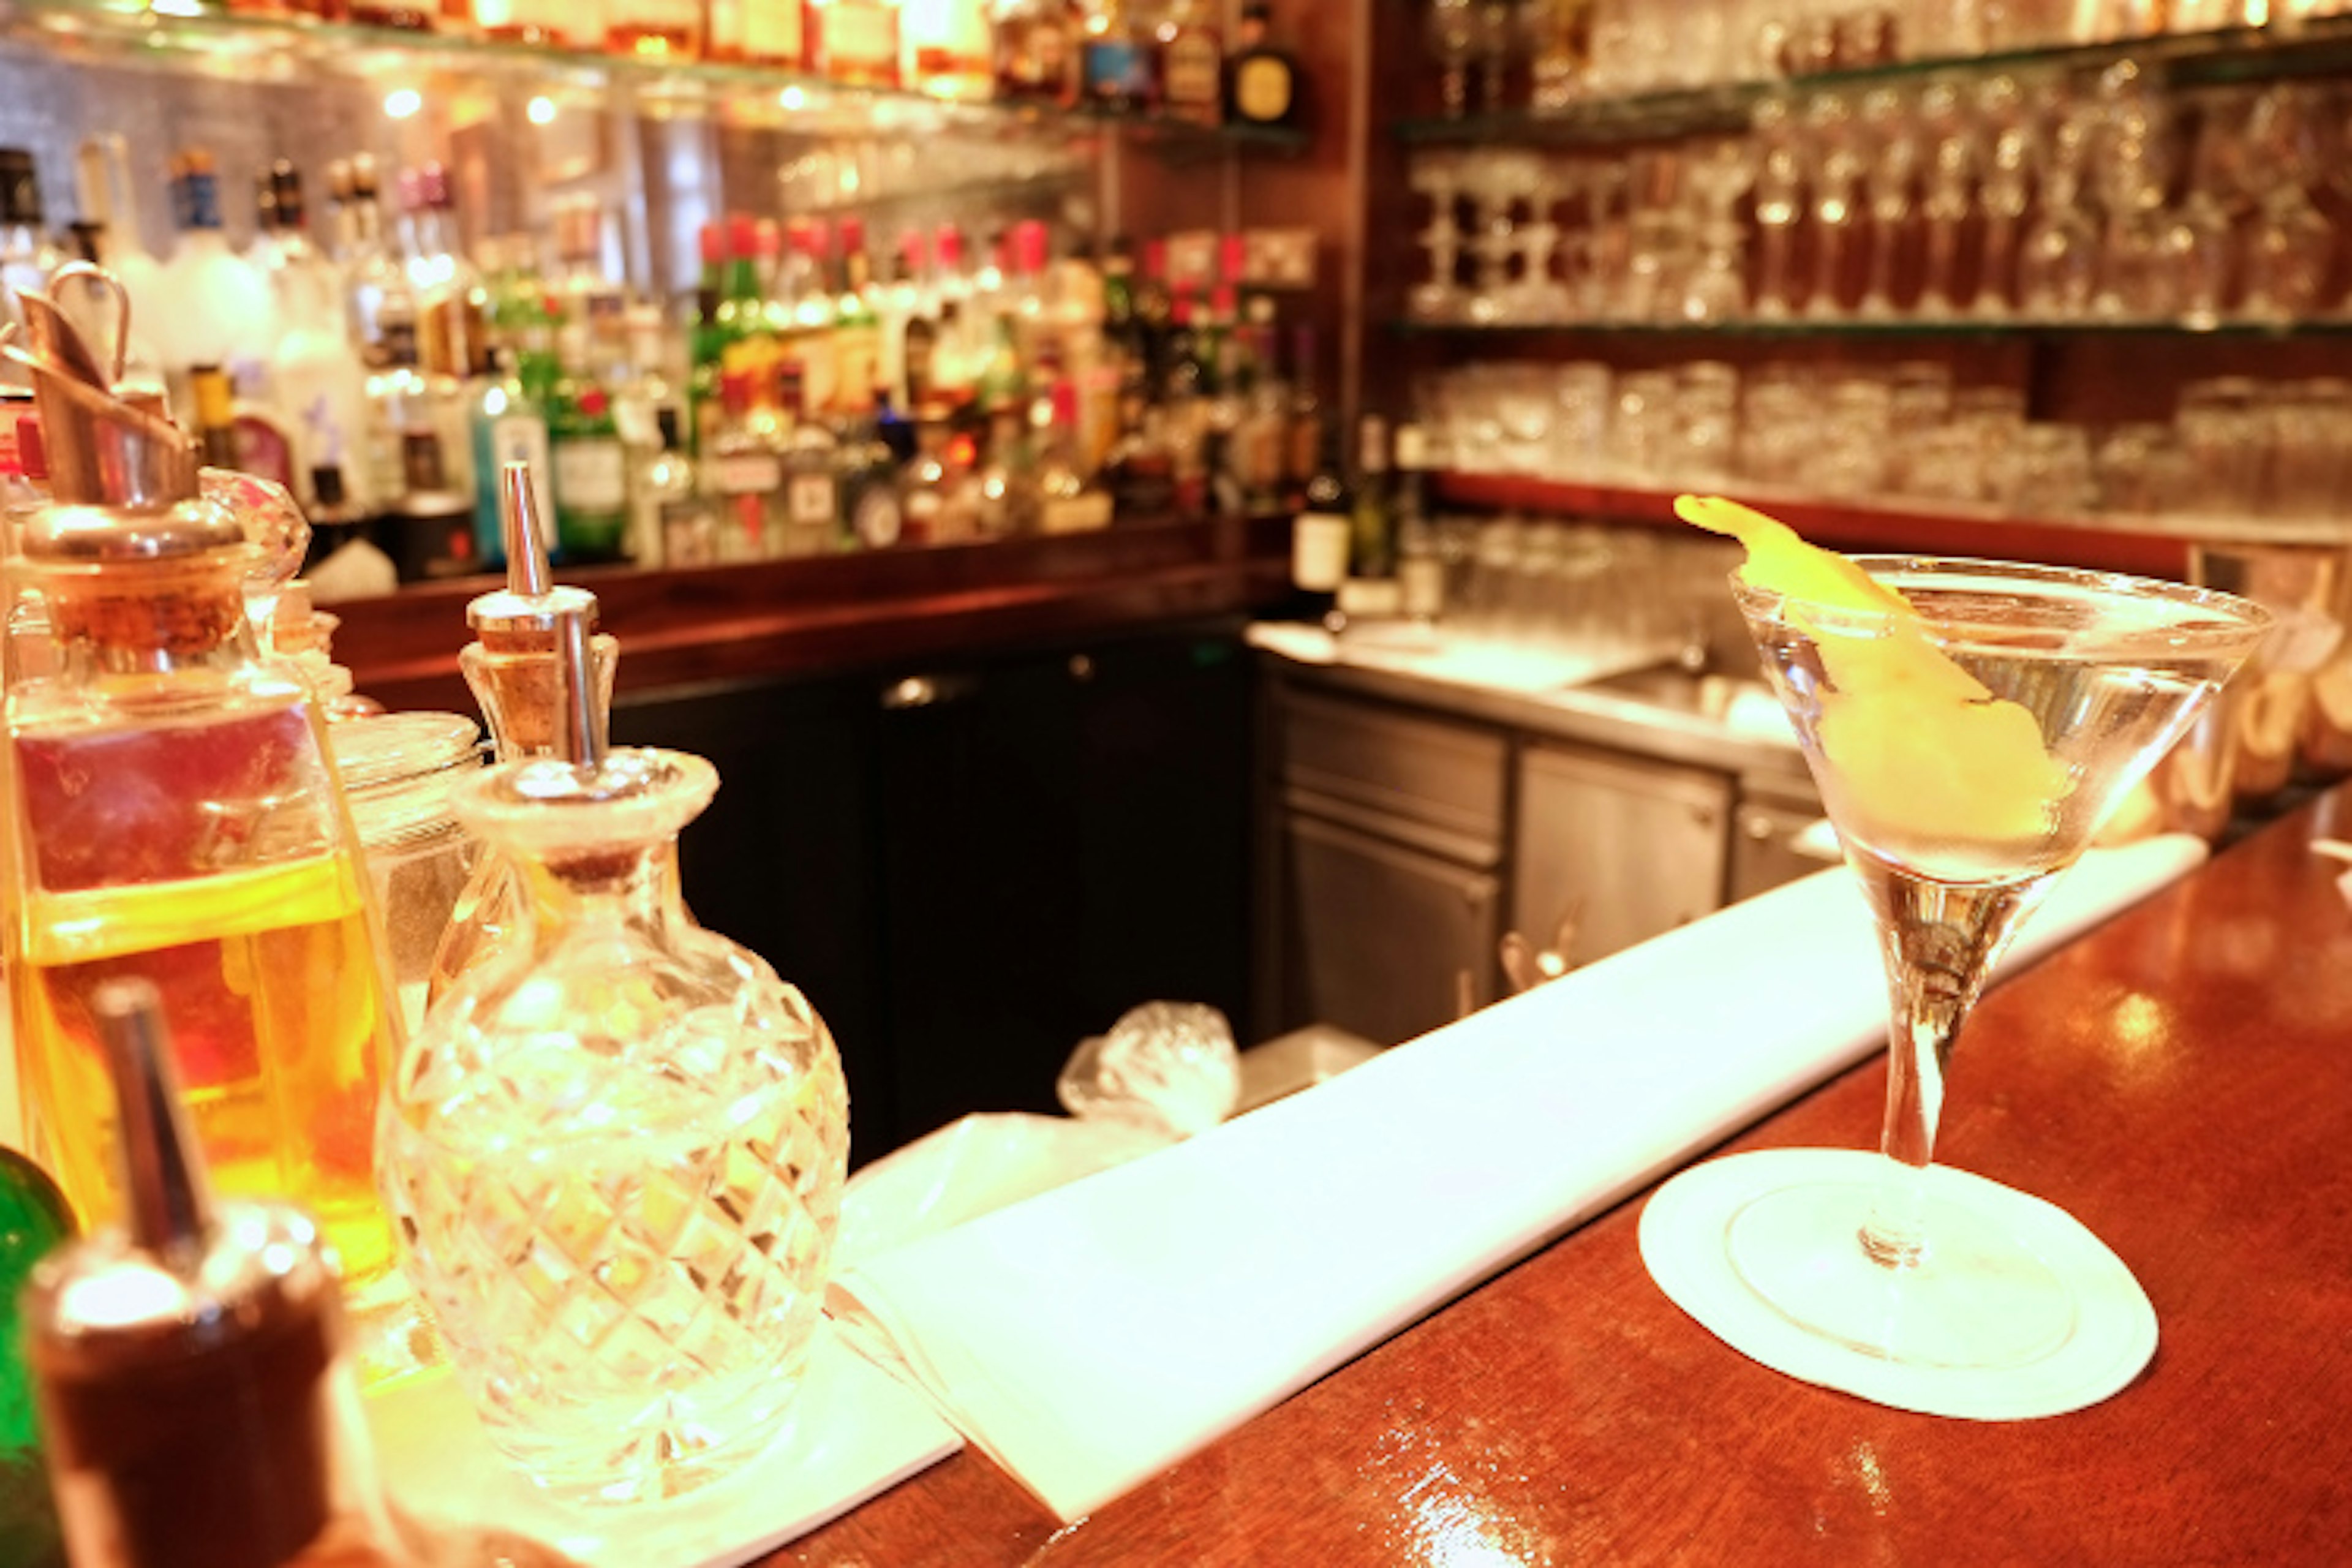 Gin, vermouth, lemon: a martini at Duke's. Image by Sally Schafer / Lonely Planet